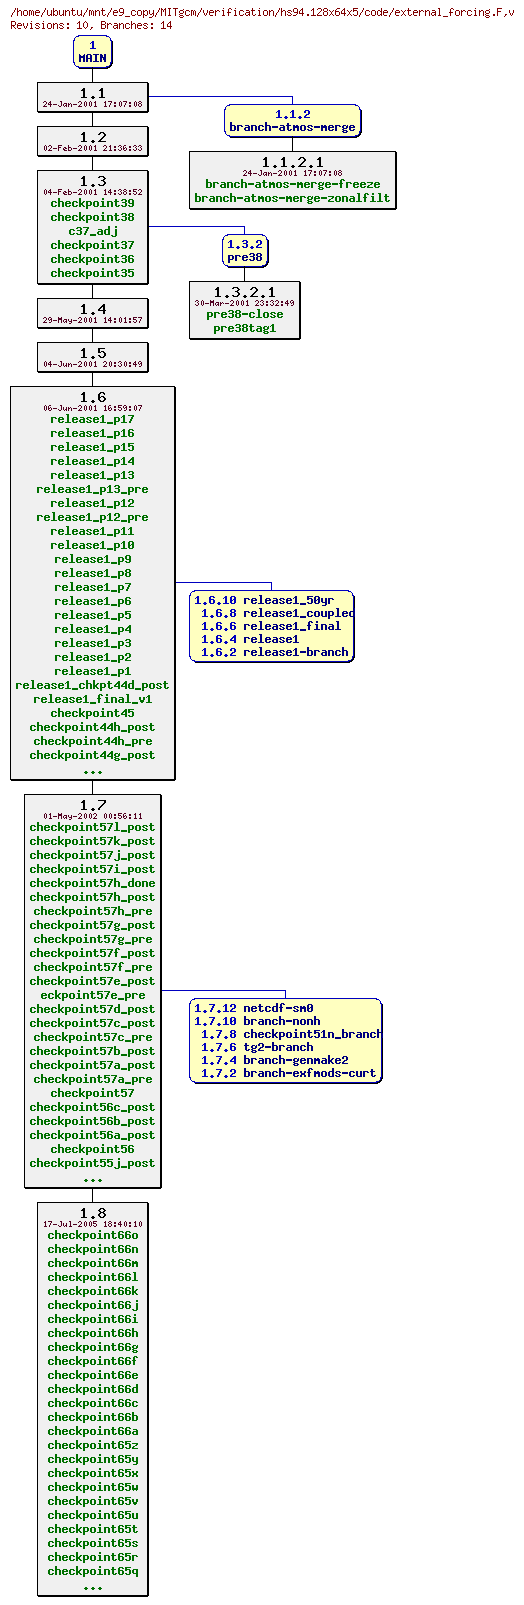 Revisions of MITgcm/verification/hs94.128x64x5/code/external_forcing.F